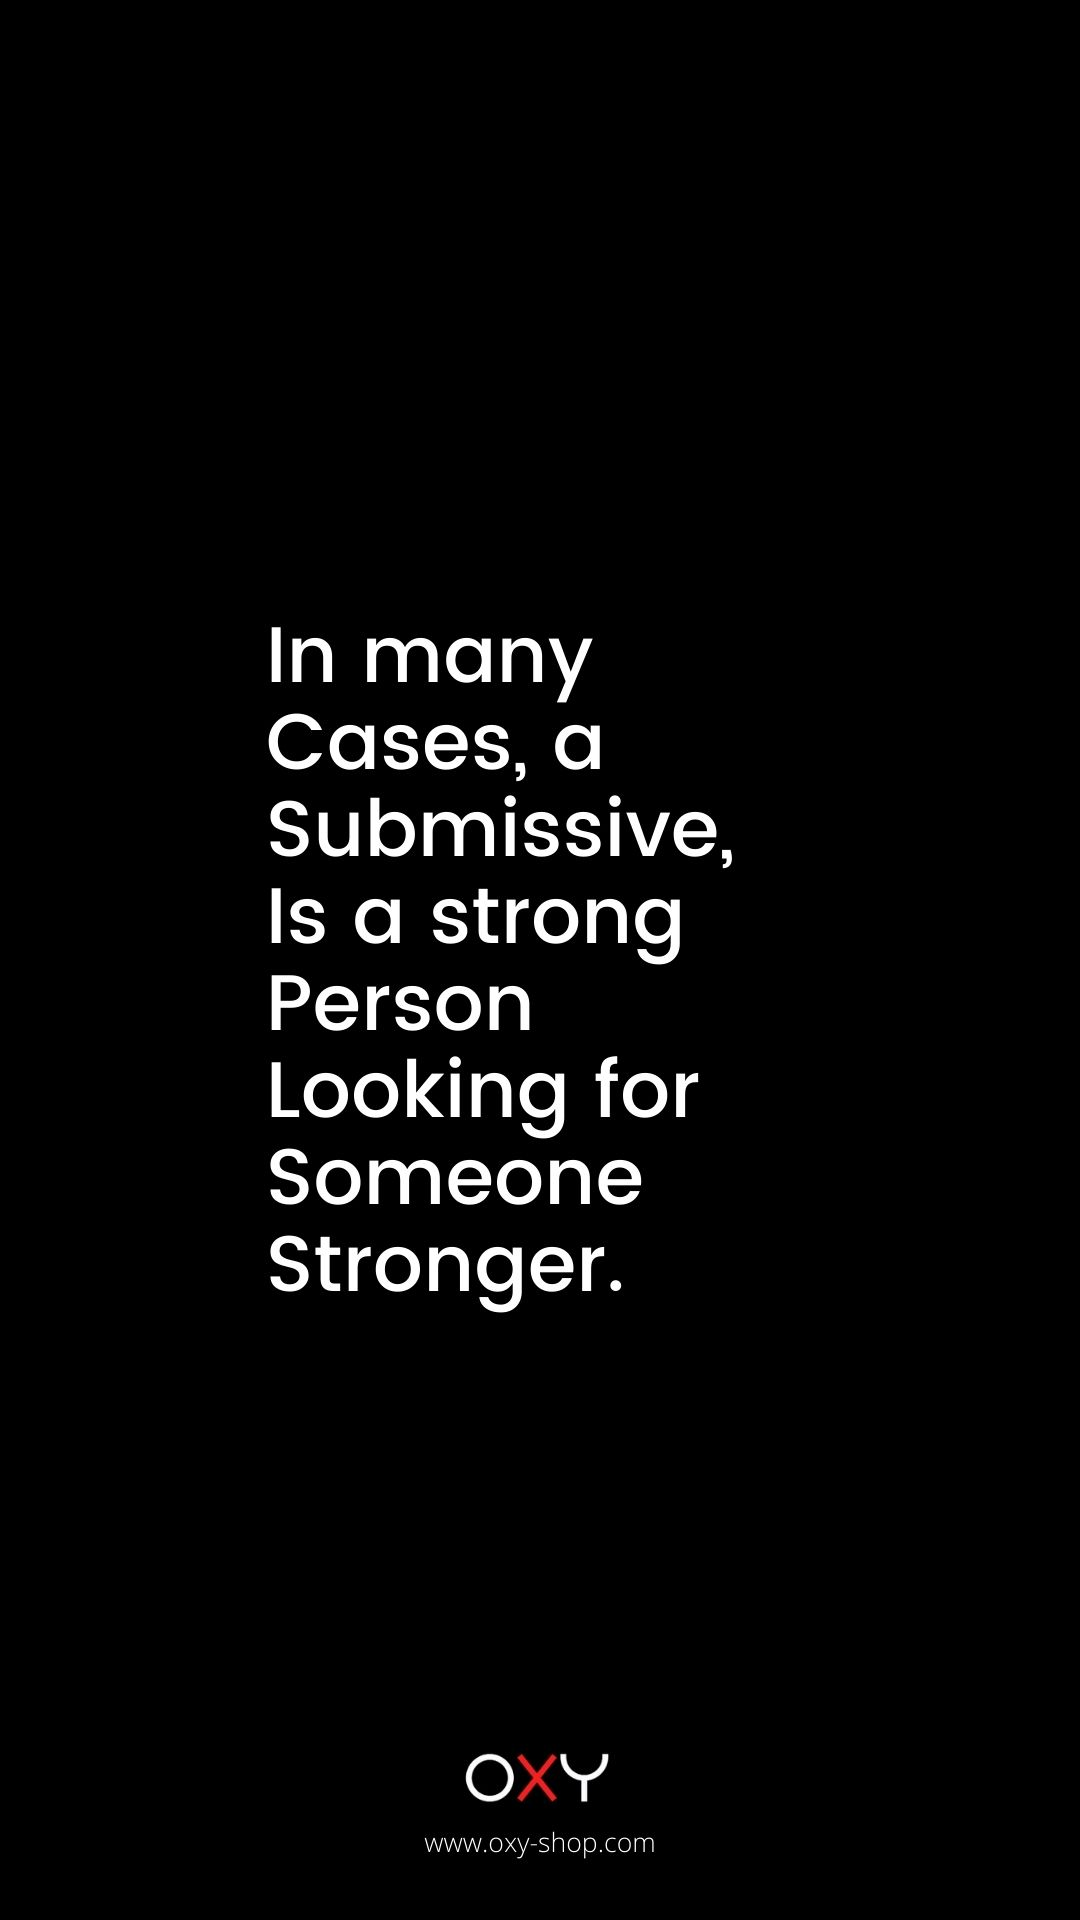 In many cases, a submissive is a strong person looking for someone stronger. - BDSM wallpaper